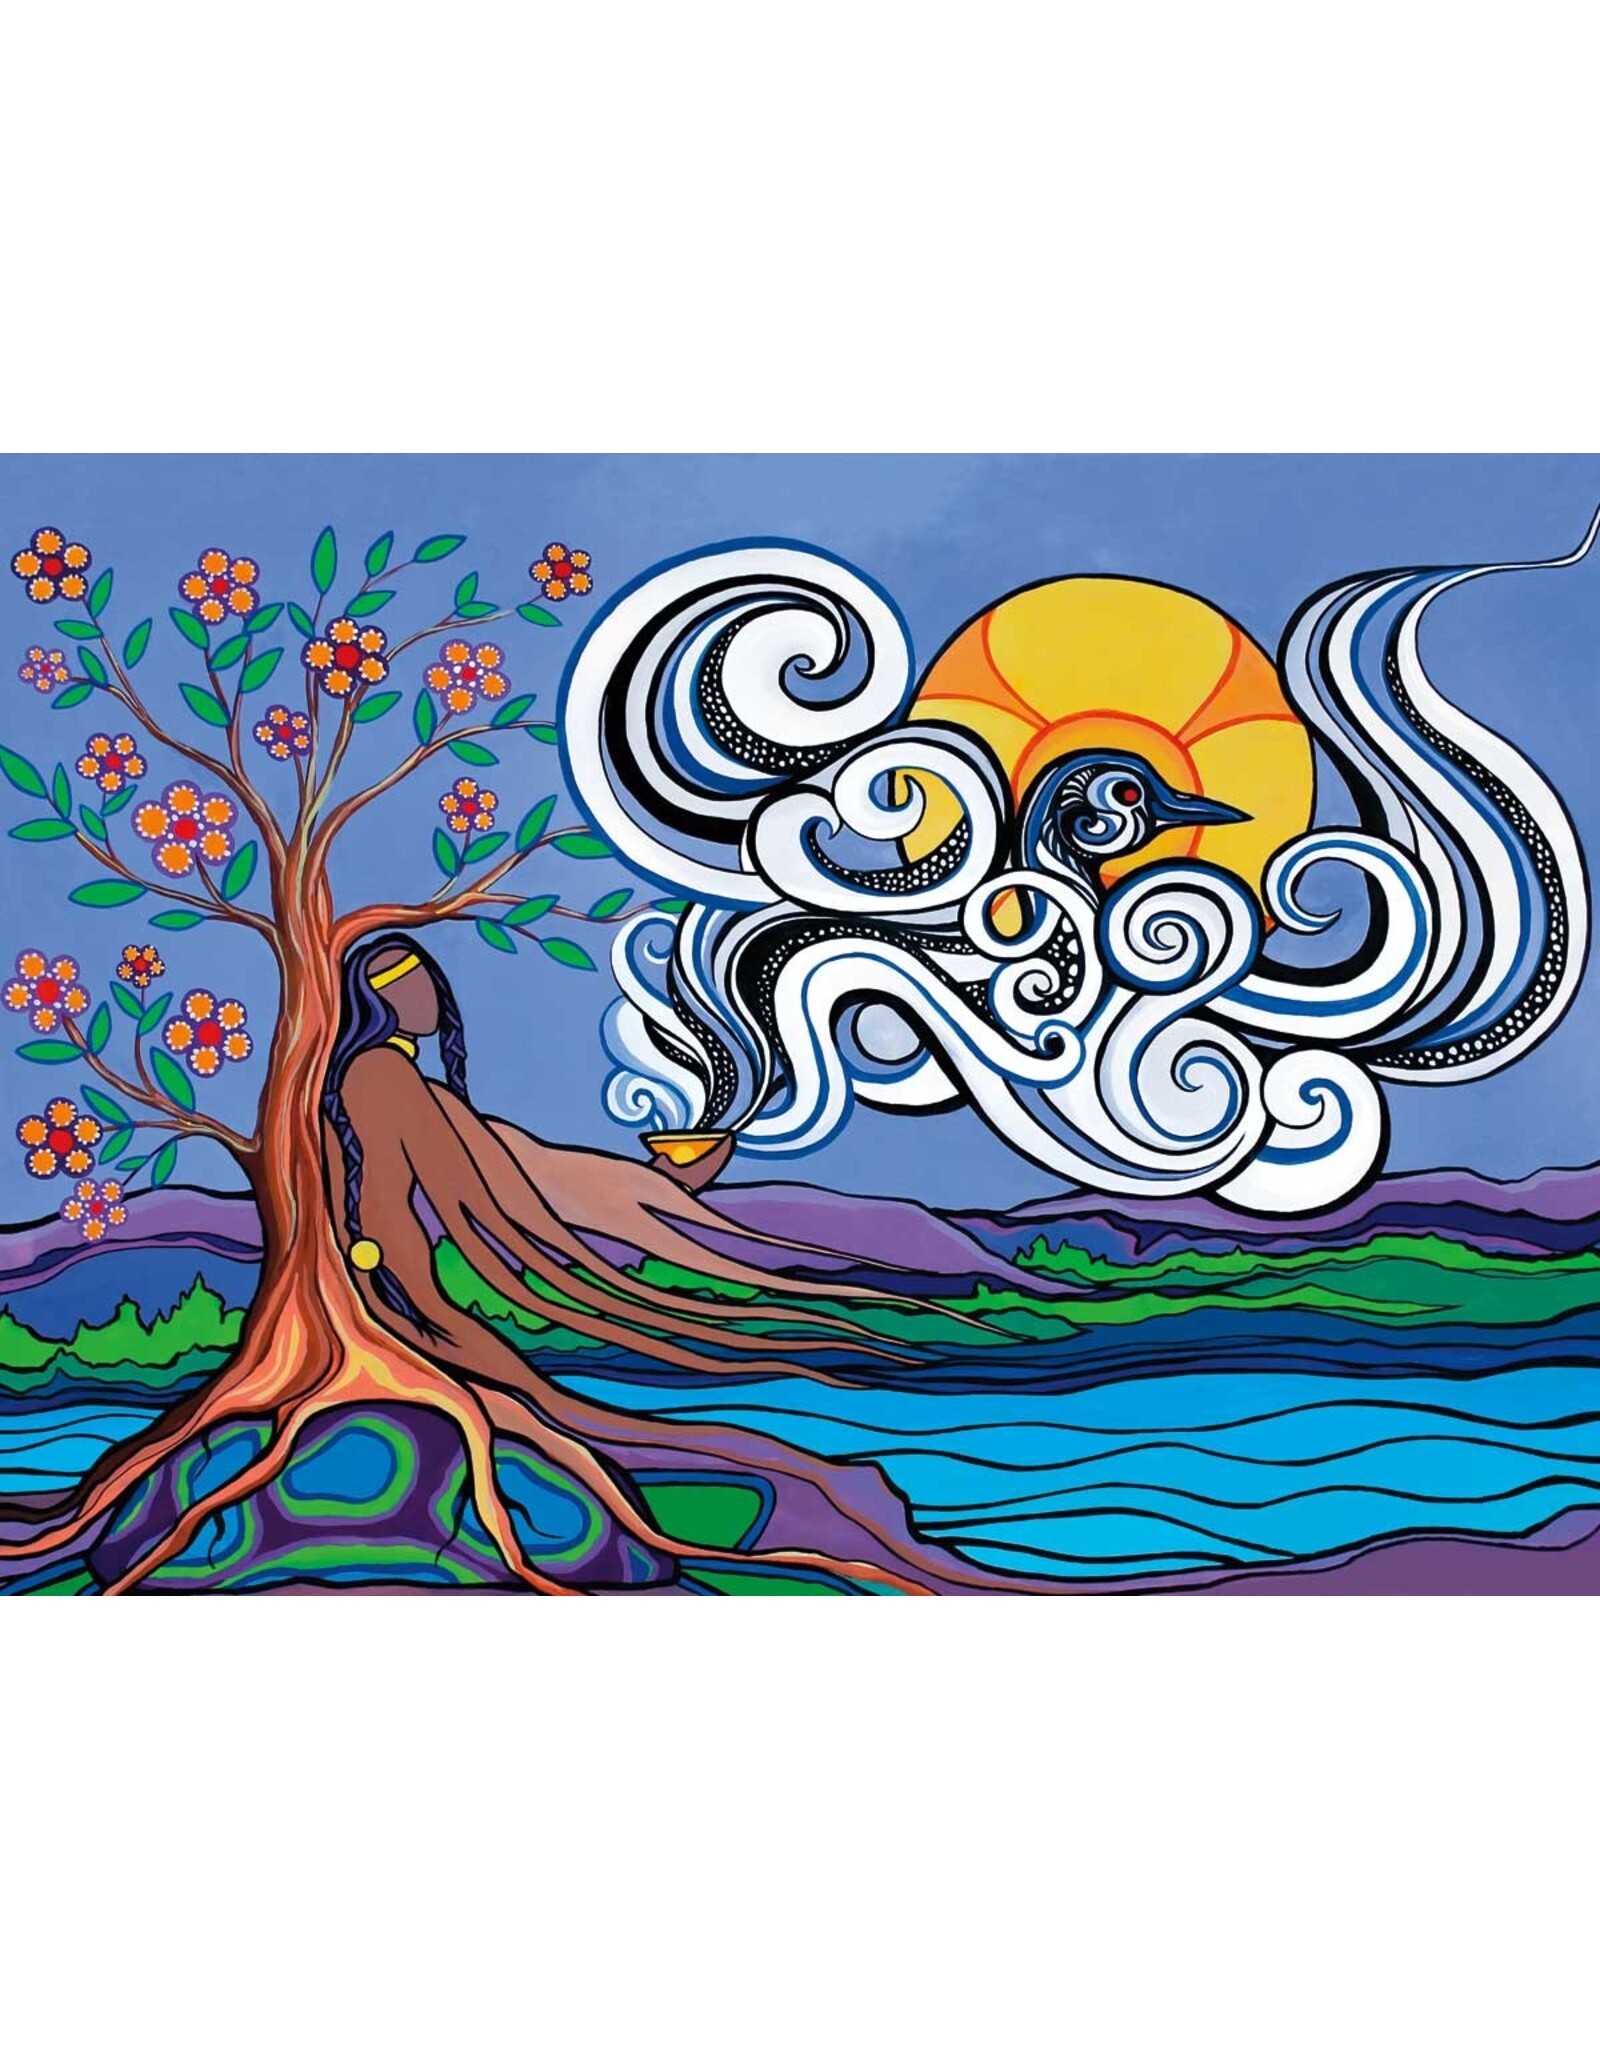 Prayers by the Lake by Pam Cailloux Small Canvas